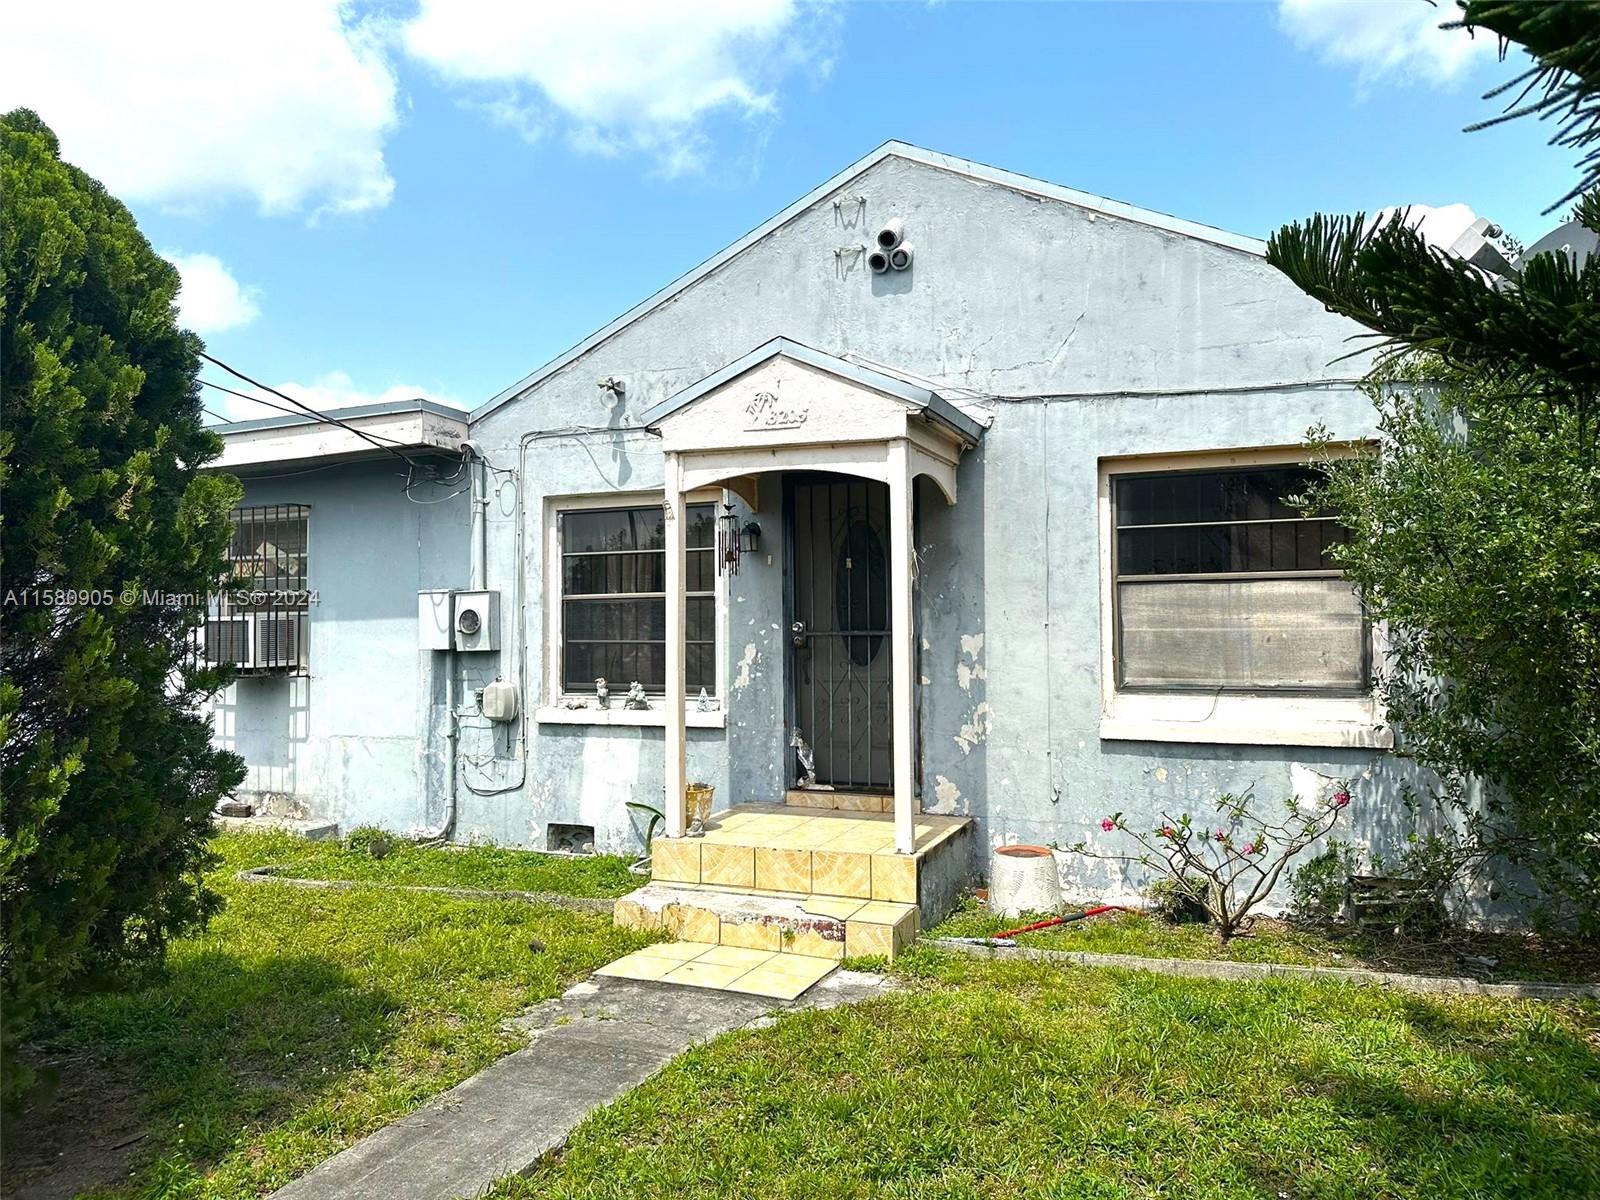 3205 Nw 69th St St, Miami, Broward County, Florida - 5 Bedrooms  
3 Bathrooms - 